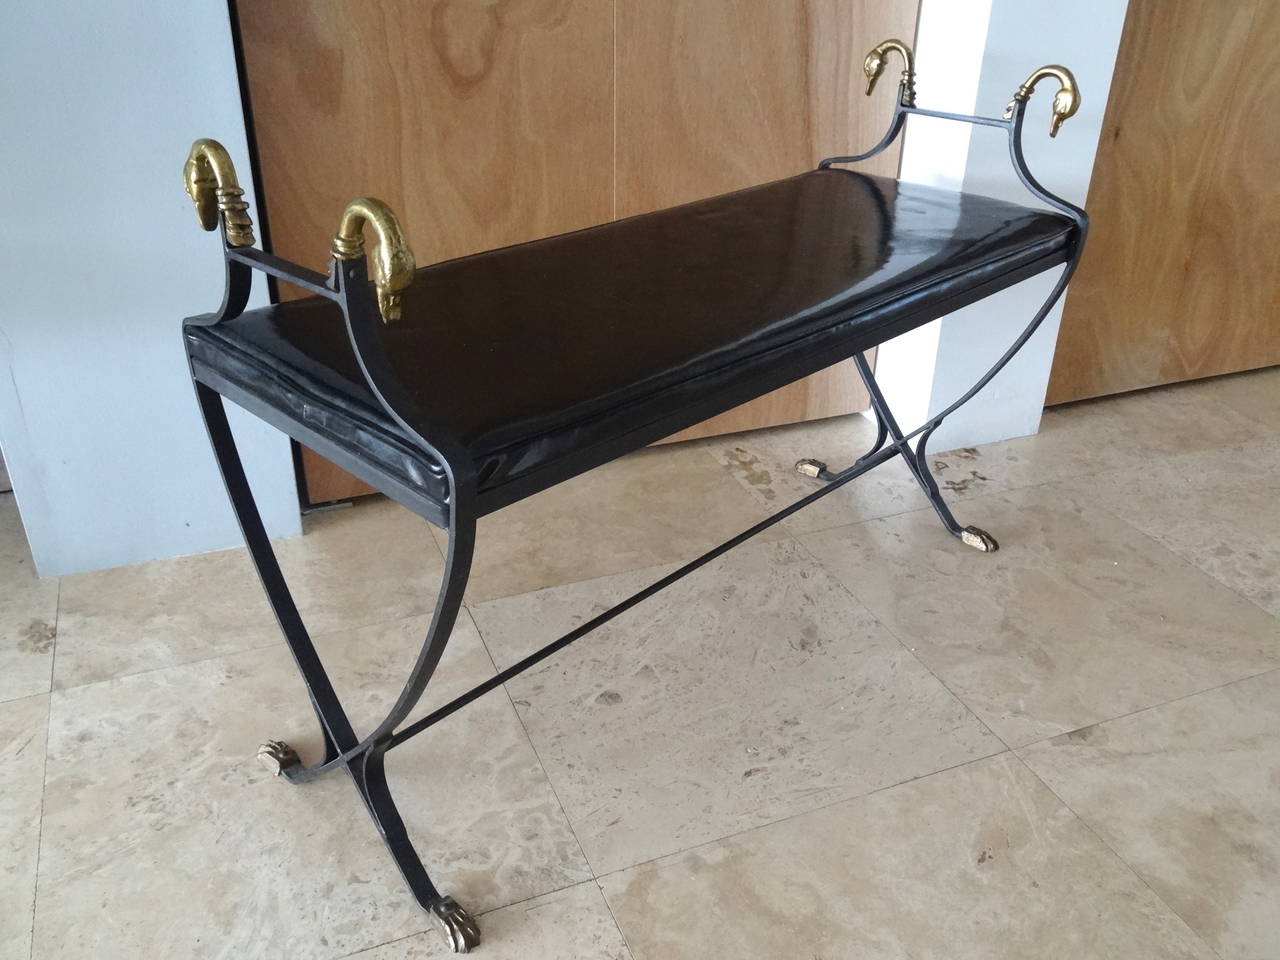 Neoclassical style bench with brass detail, circa 1950s. Patented leather uphostery (vintage).